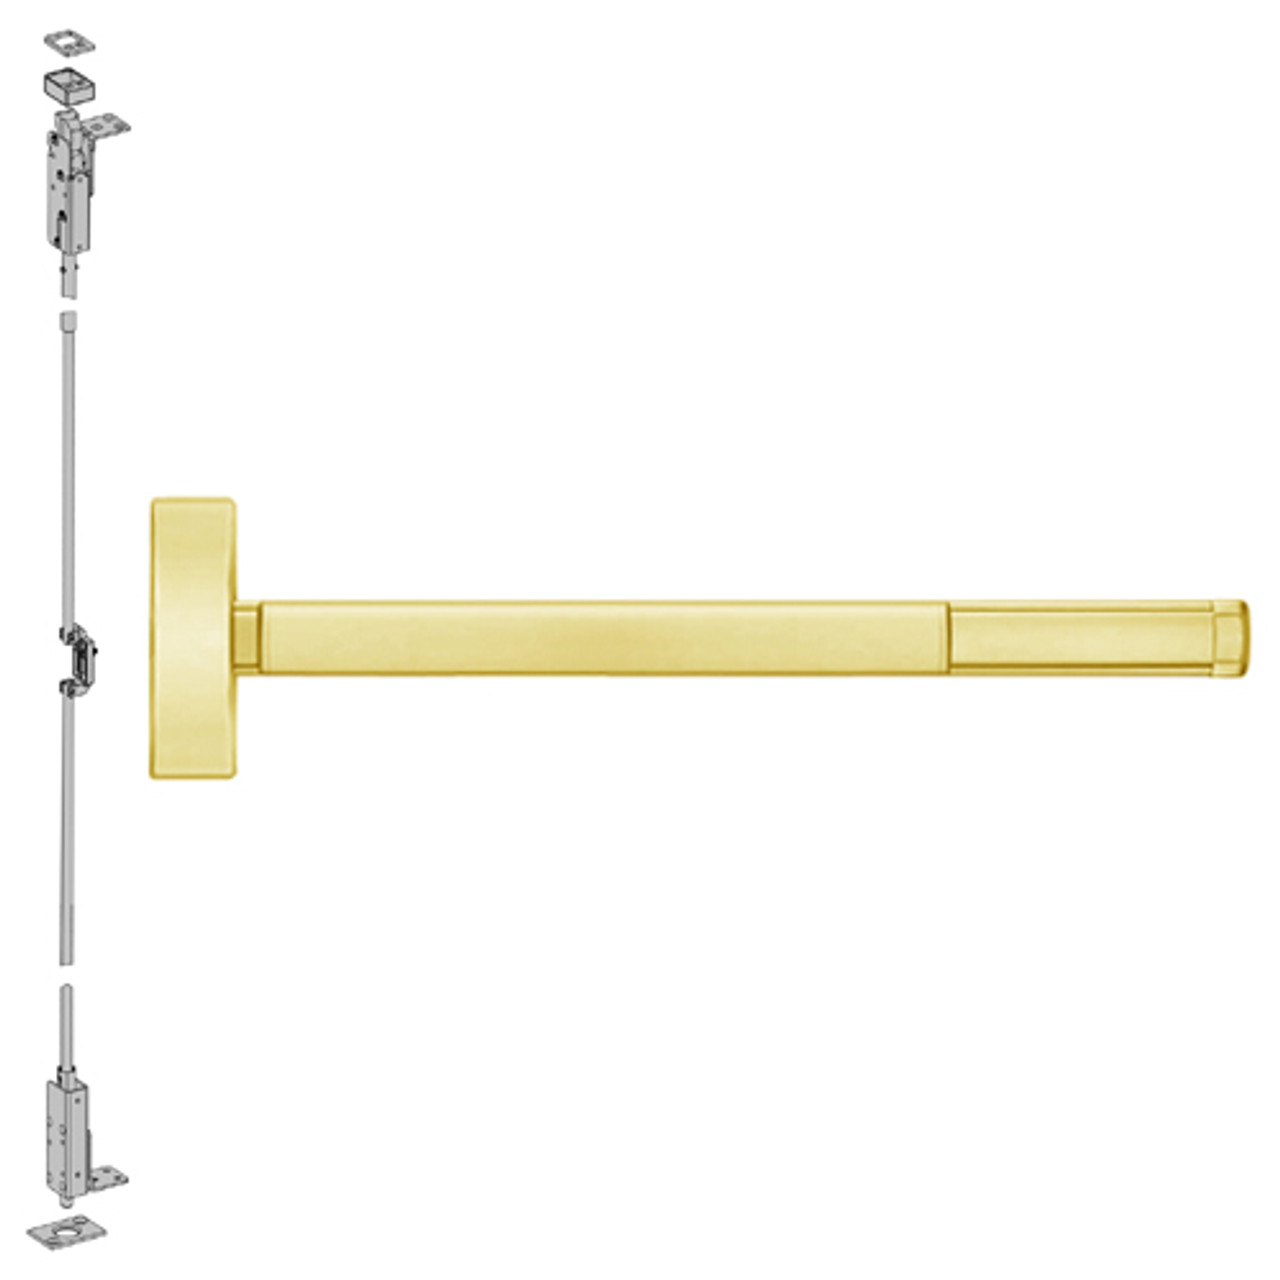 ELRFL2715LBR-605-36 PHI 2700 Series Wood Door Concealed Vertical Exit Device with Electric Latch Retraction Prepped for Thumbpiece Always Active in Bright Brass Finish